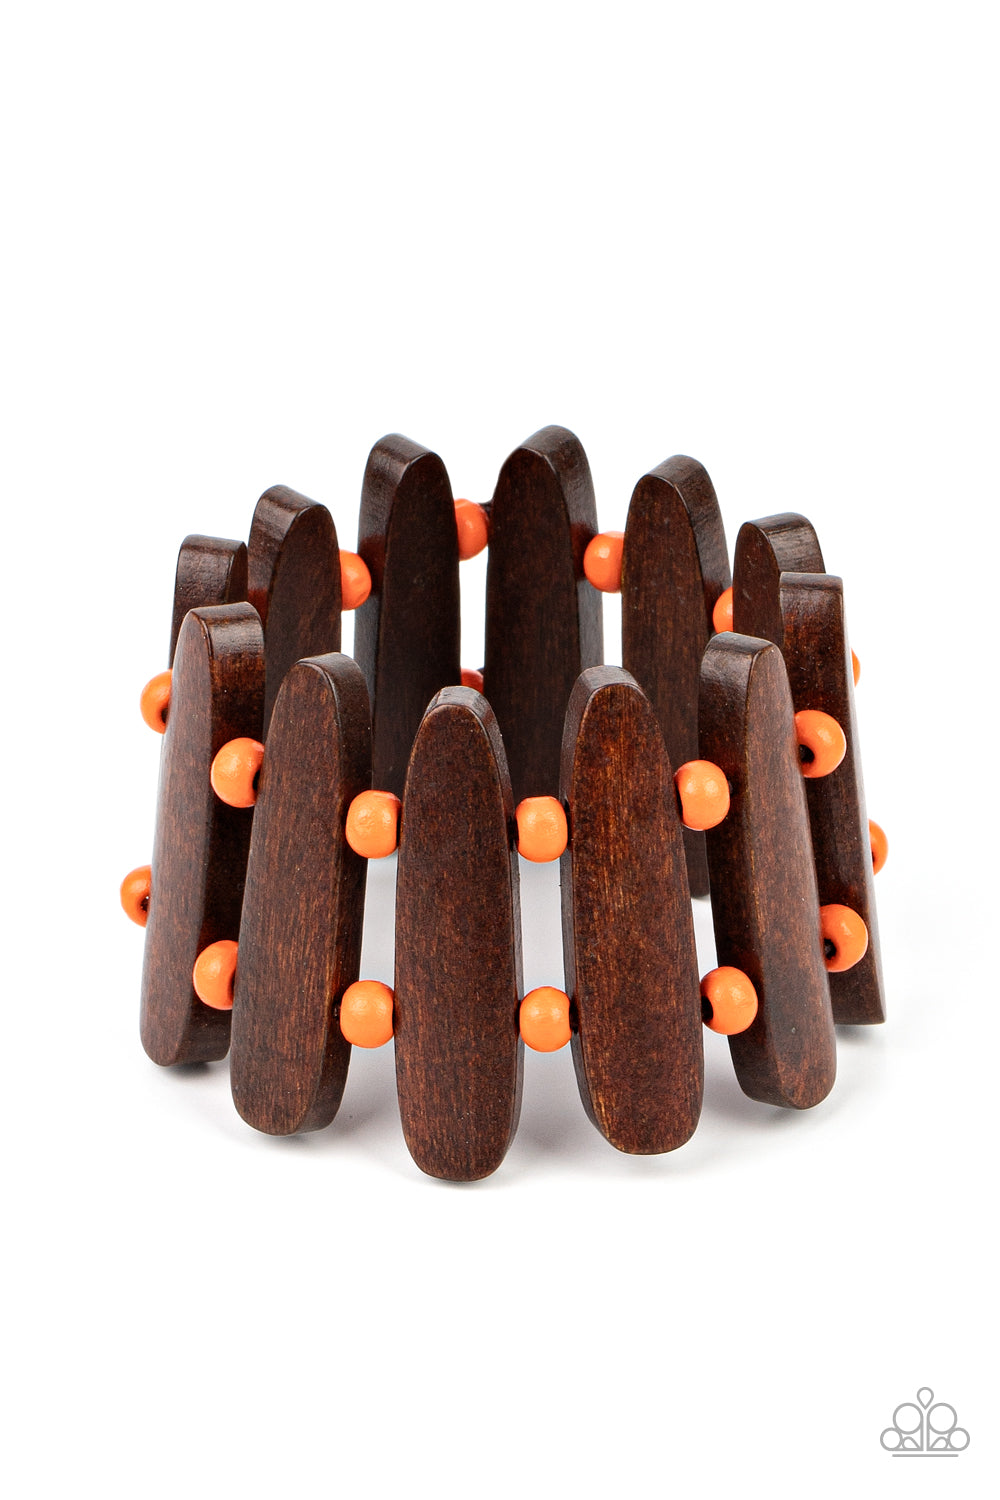 Coronado Cabana Orange Wooden Bracelet - Paparazzi Accessories  Pairs of Burnt Orange wooden beads and oblong brown wooden frames alternate along stretchy bands around the wrist for a seasonal pop of color.  All Paparazzi Accessories are lead free and nickel free!  Sold as one individual bracelet.